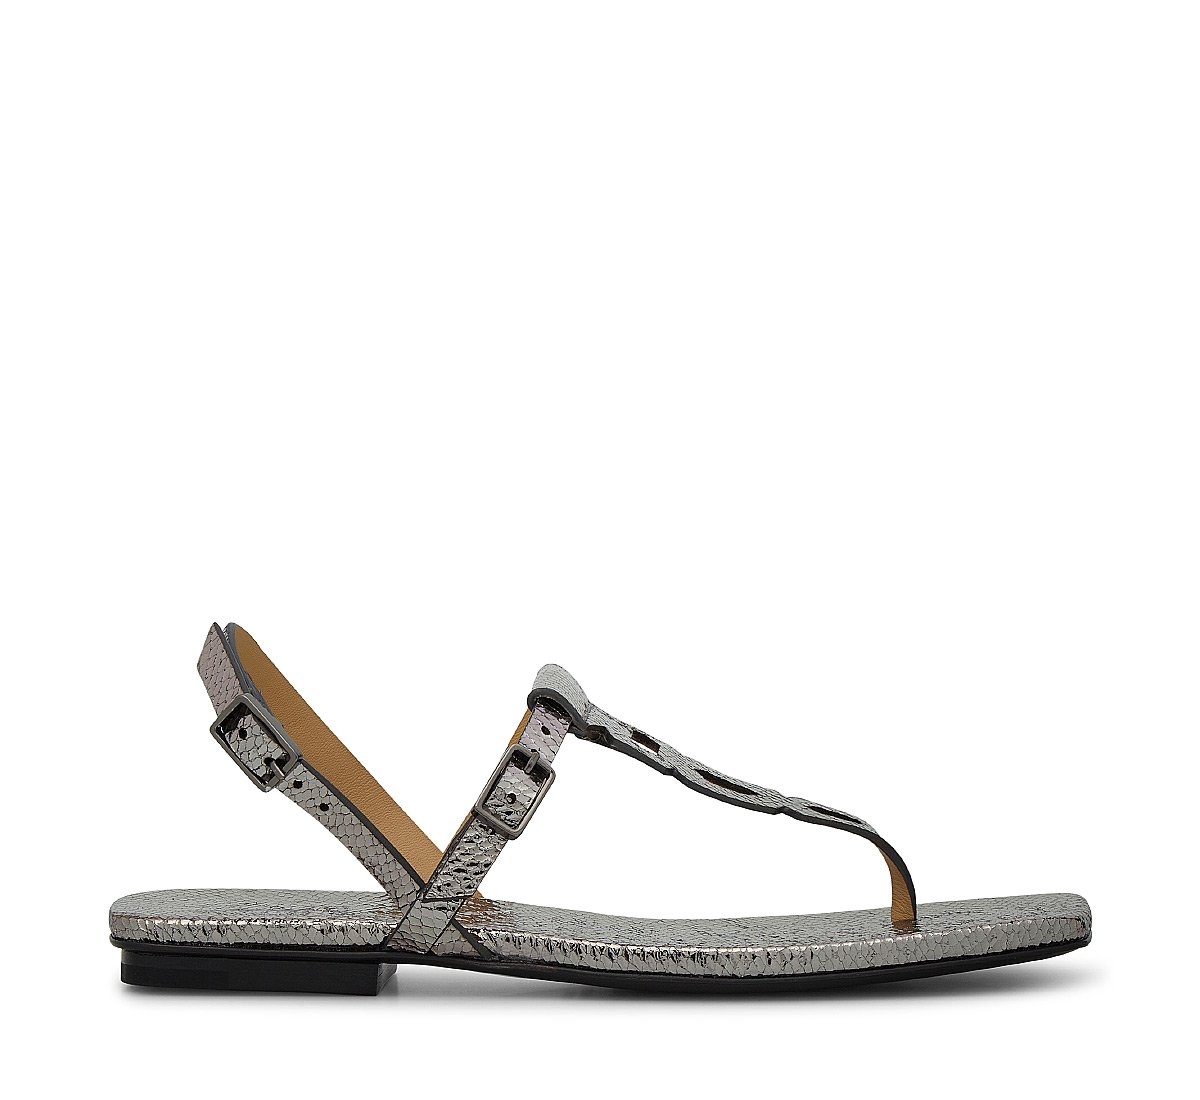 Reptile-effect leather sandal